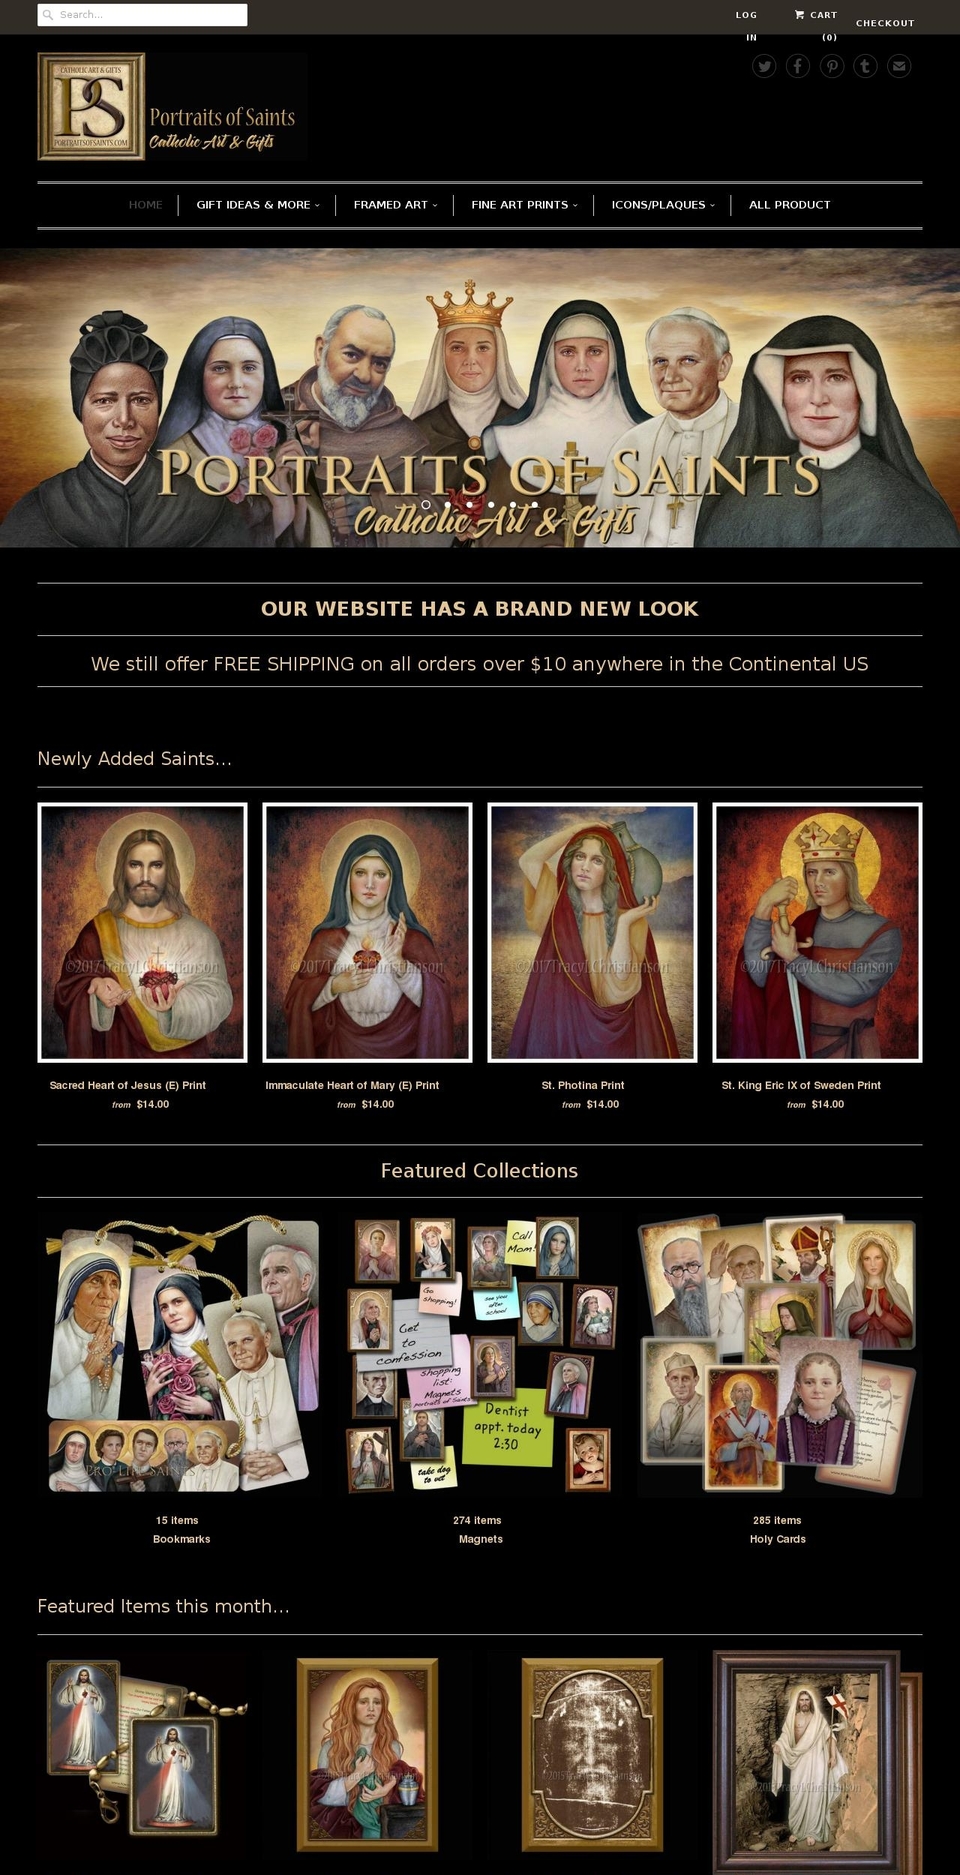 OOTS Support Shopify theme site example portraitsofsaints.com